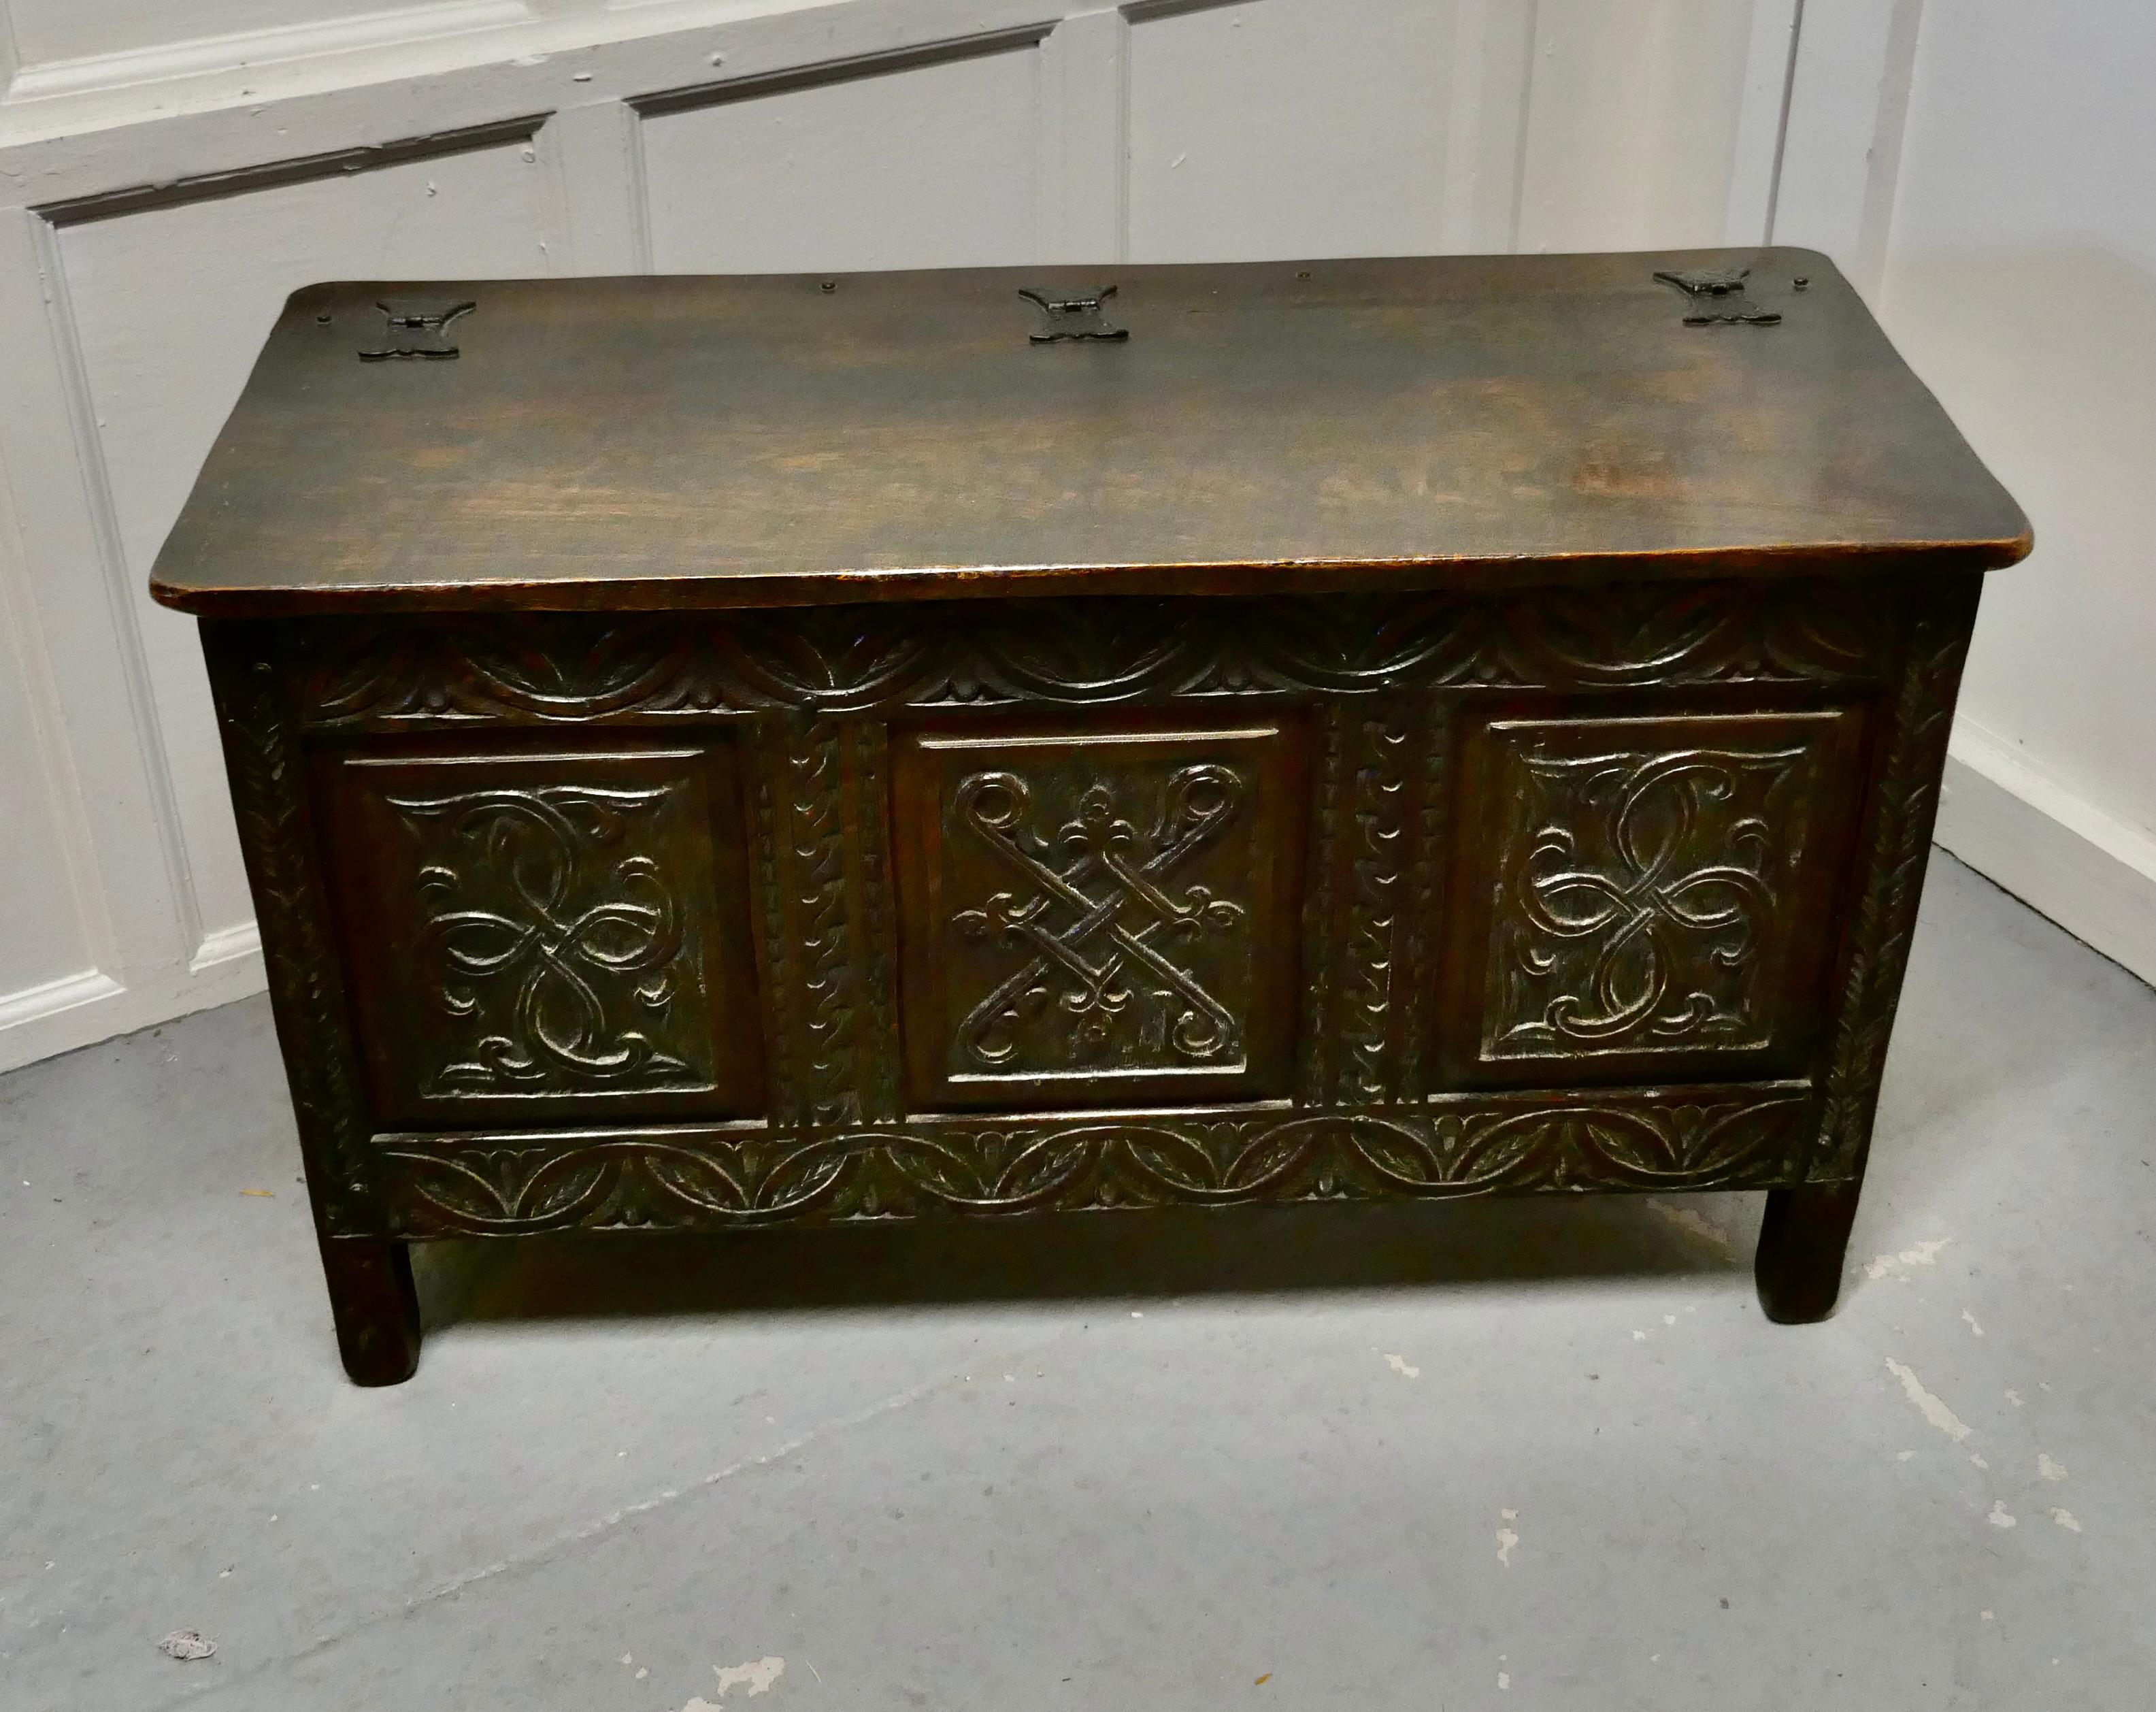 Arts & Crafts Gothic carved oak coffer

This is a fine quality carved oak coffer, in the Arts & Crafts Gothic style and dates from the late 19th Century and it has been carved by a master craftsman.

The front has three panels in the Gothic